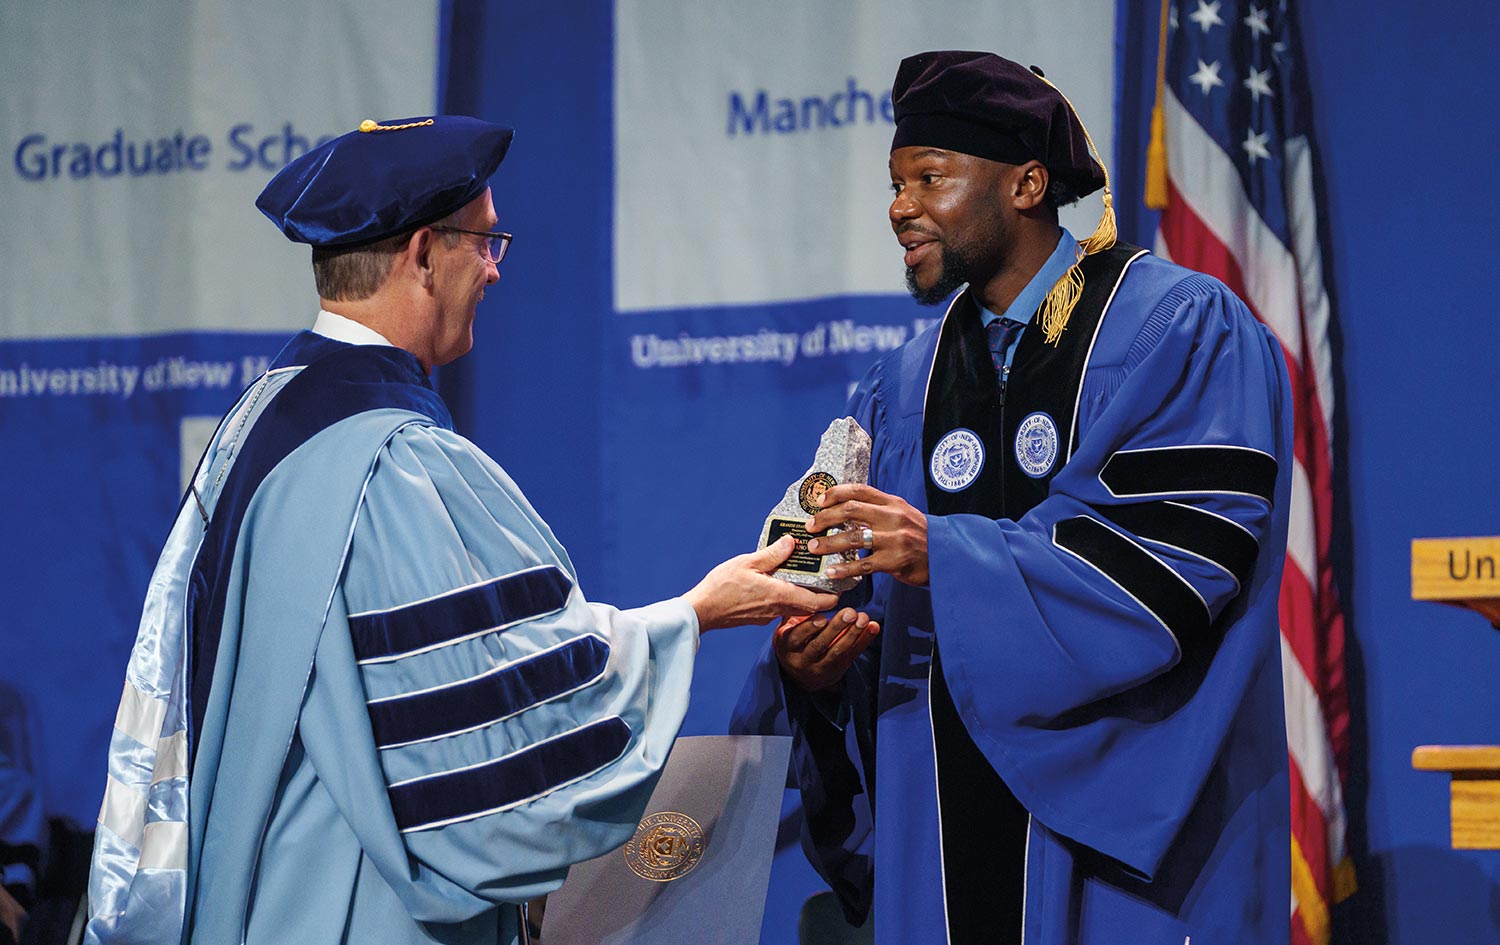 on stage a faculty member presents Deo Mwano with the Granite State Award